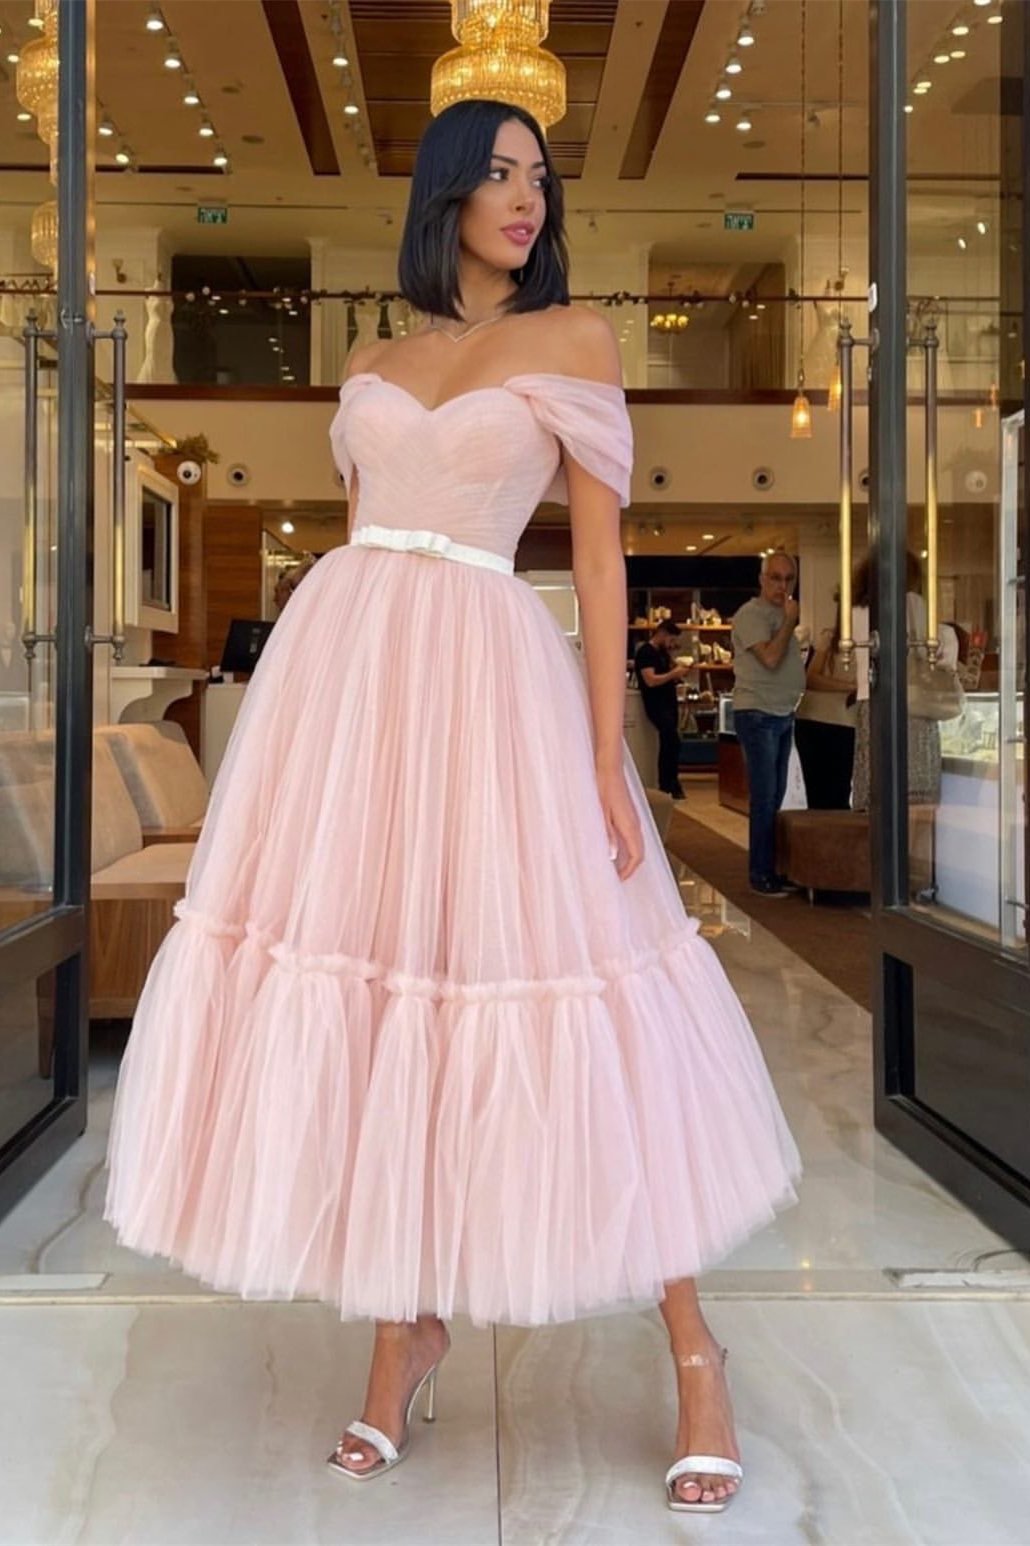 Fabulous Off-the-Shoulder Pink Sweetheart Evening Dress Tulle With Belt - lulusllly